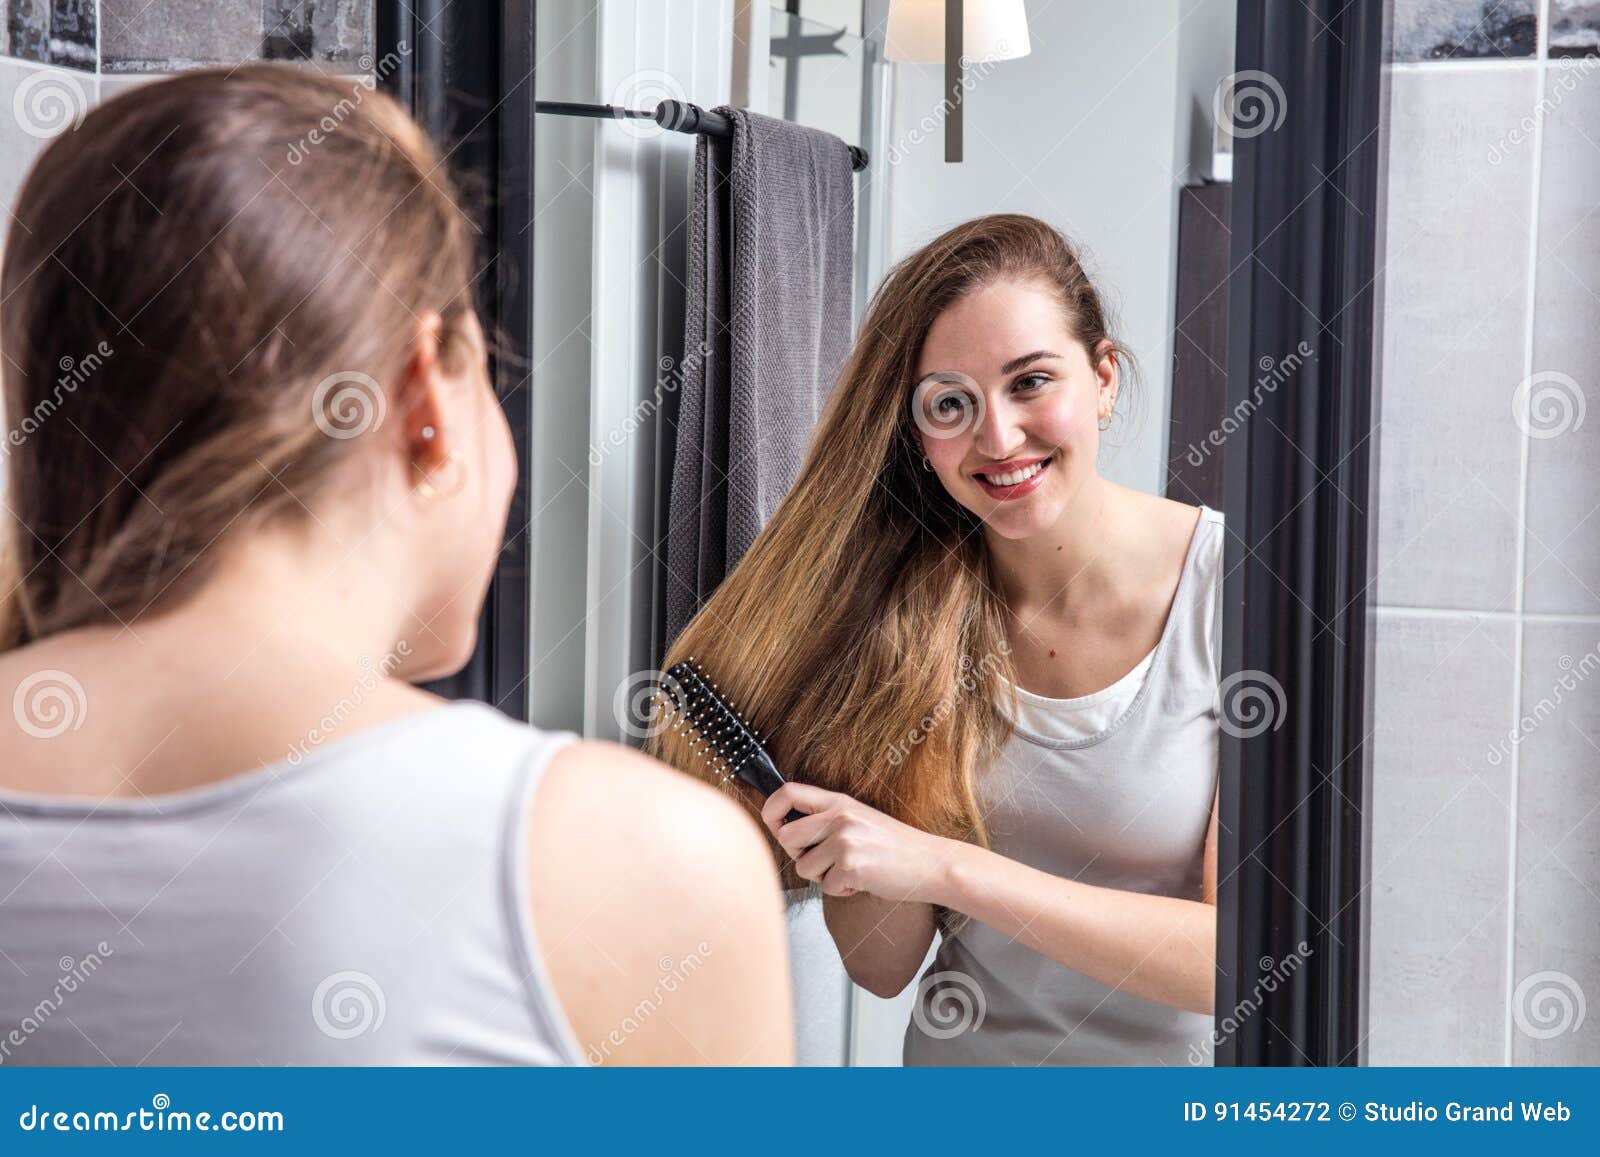 Smiling Girl Brushing Her Long Hair In Front Of Mirror Stock Photo